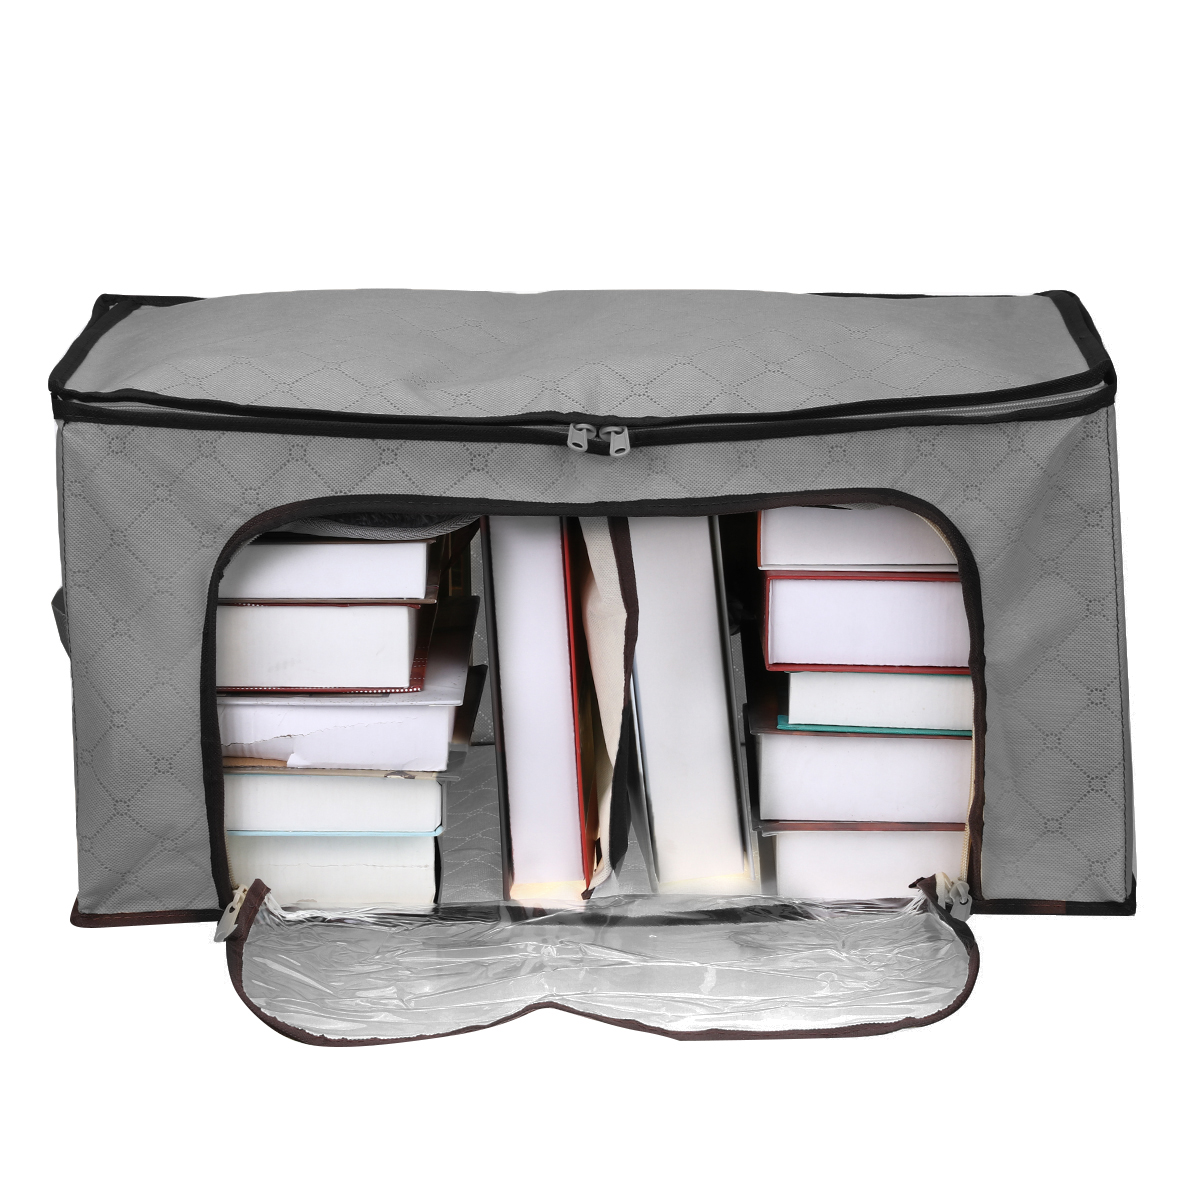 3PCS Clothes Storage Bag Window Compartment Non-woven Fabric Large Capacity Clothing Storage Bag